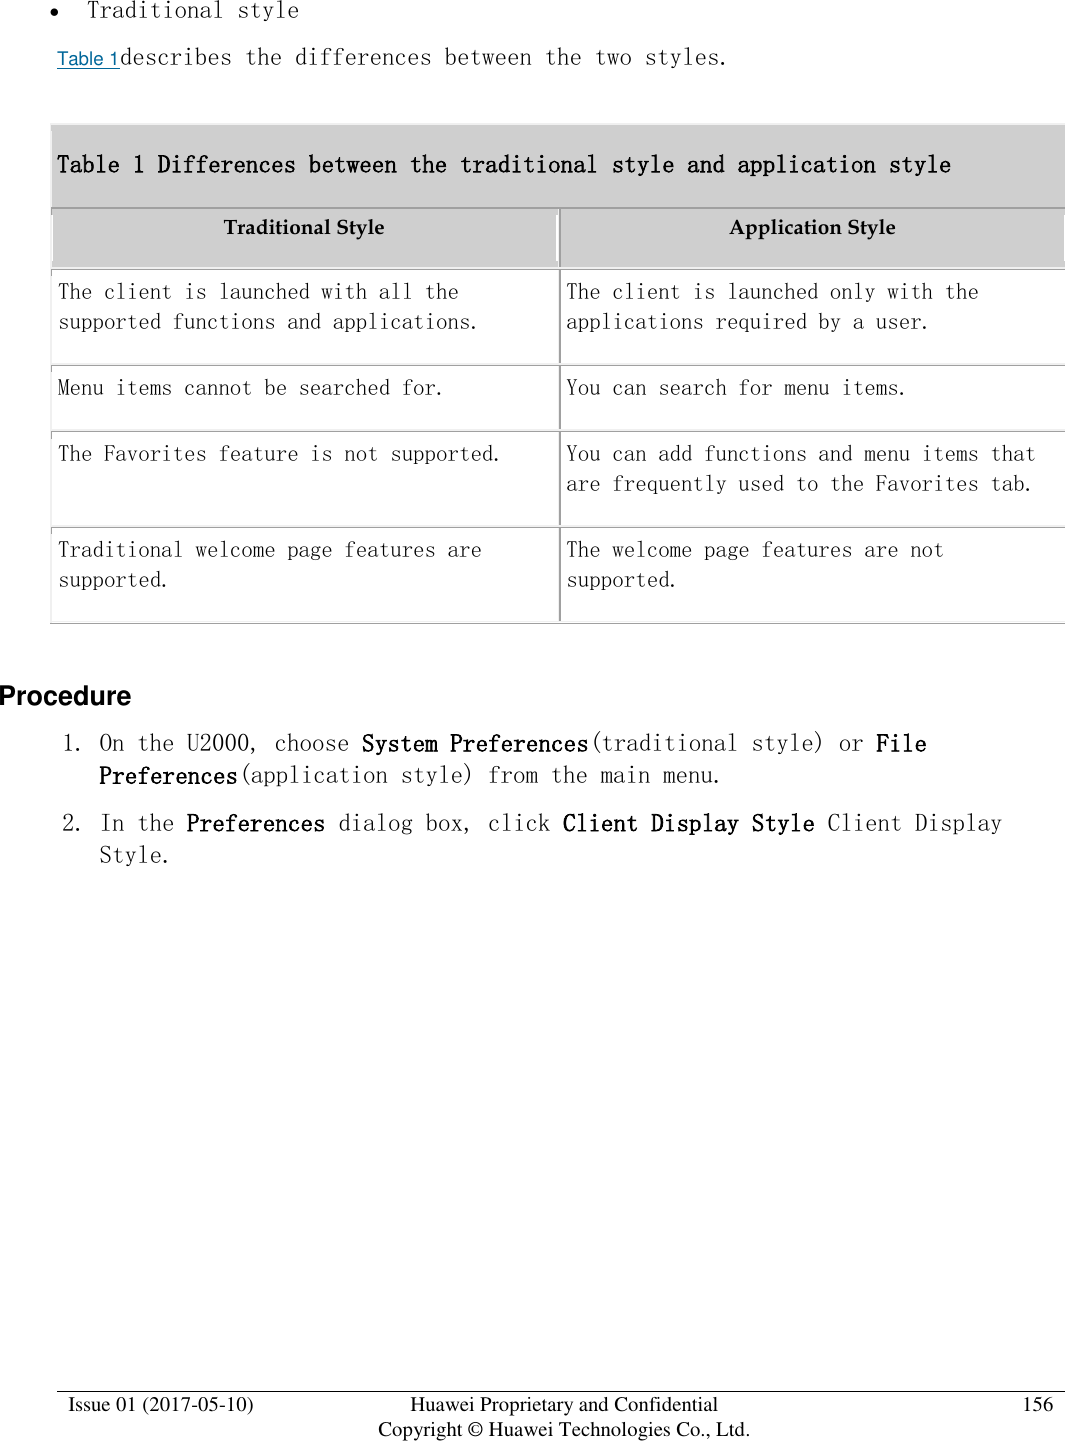  Issue 01 (2017-05-10) Huawei Proprietary and Confidential      Copyright © Huawei Technologies Co., Ltd. 156   Traditional style Table 1describes the differences between the two styles. Table 1 Differences between the traditional style and application style Traditional Style Application Style  The client is launched with all the supported functions and applications. The client is launched only with the applications required by a user. Menu items cannot be searched for. You can search for menu items. The Favorites feature is not supported. You can add functions and menu items that are frequently used to the Favorites tab. Traditional welcome page features are supported. The welcome page features are not supported.  Procedure 1. On the U2000, choose System Preferences(traditional style) or File Preferences(application style) from the main menu. 2. In the Preferences dialog box, click Client Display Style Client Display Style. 